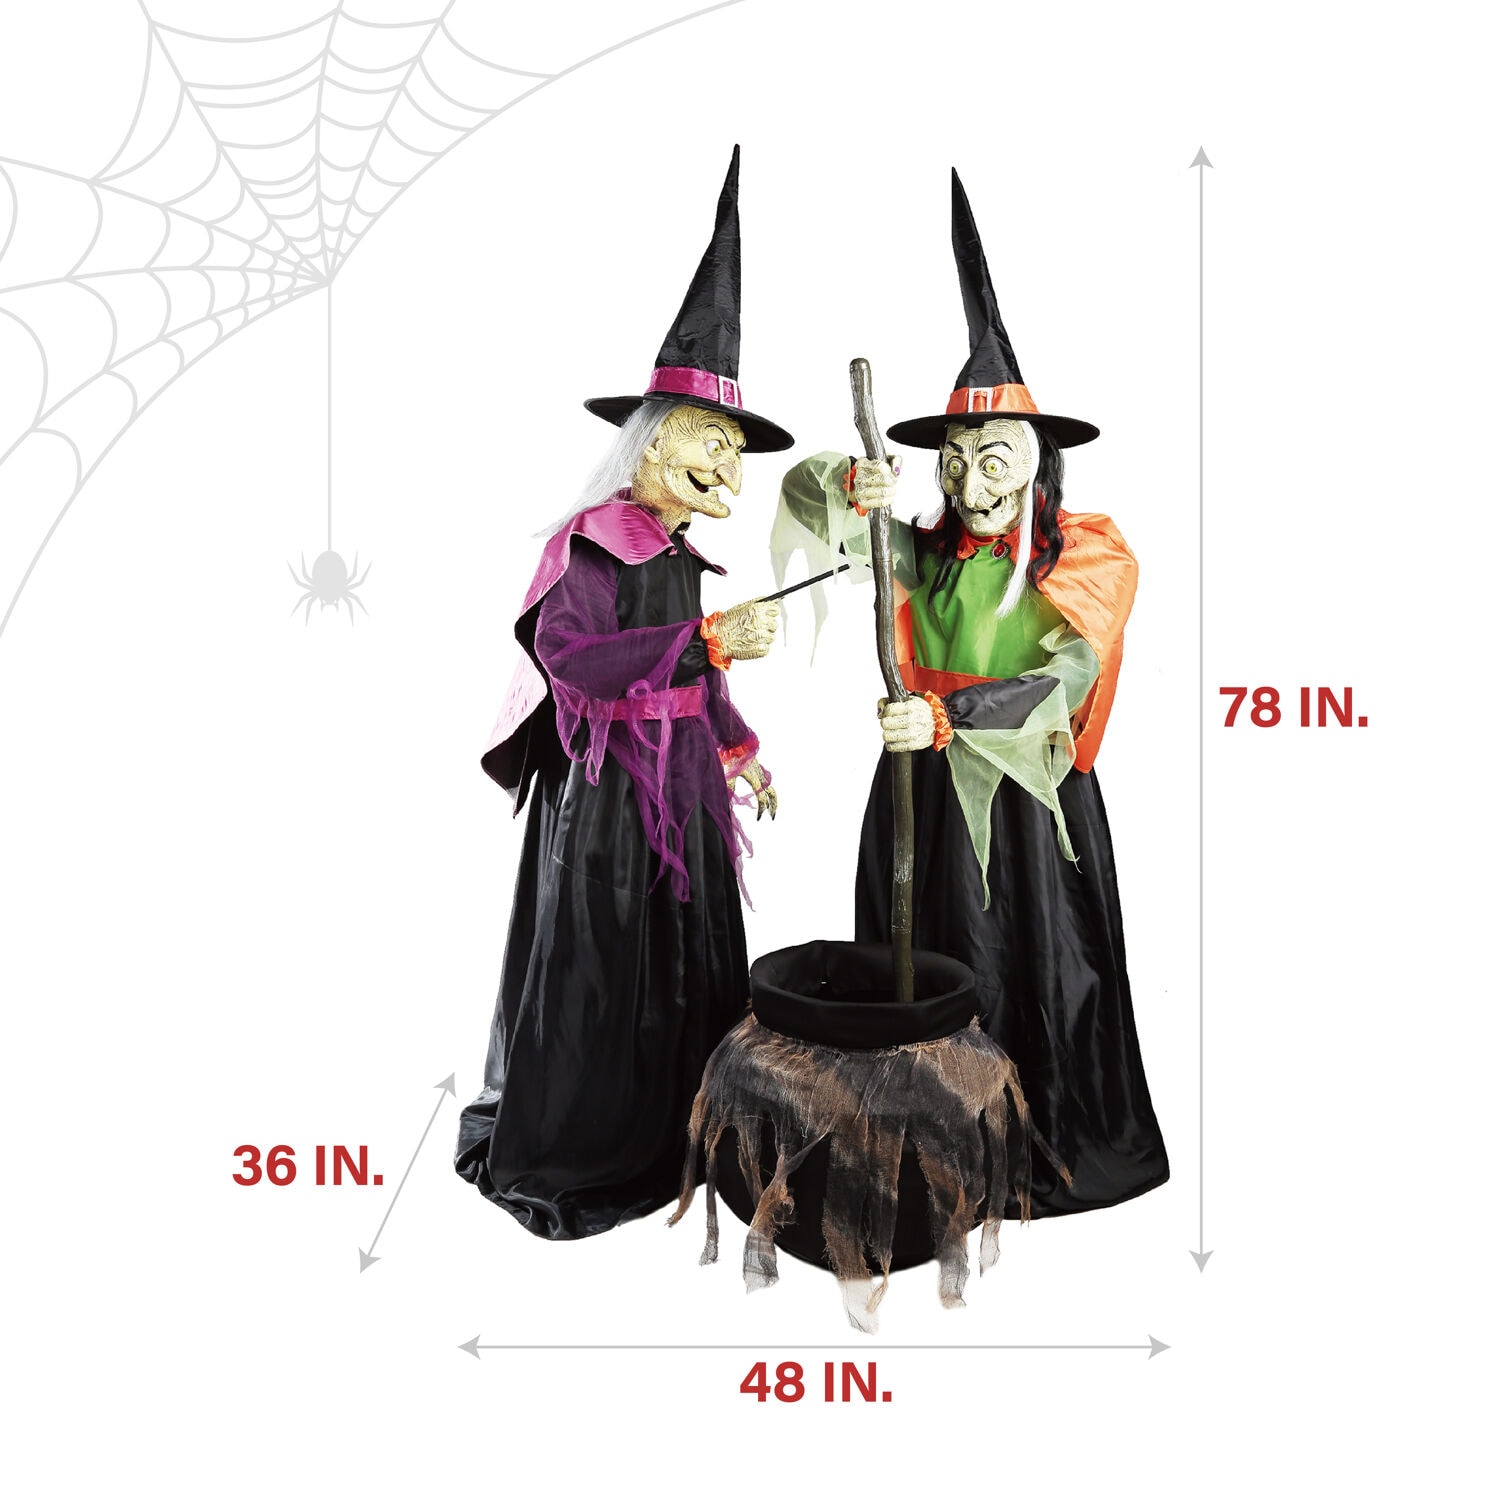 The Holiday Aisle® 5.6 Ft Halloween Hanging Animated Talking